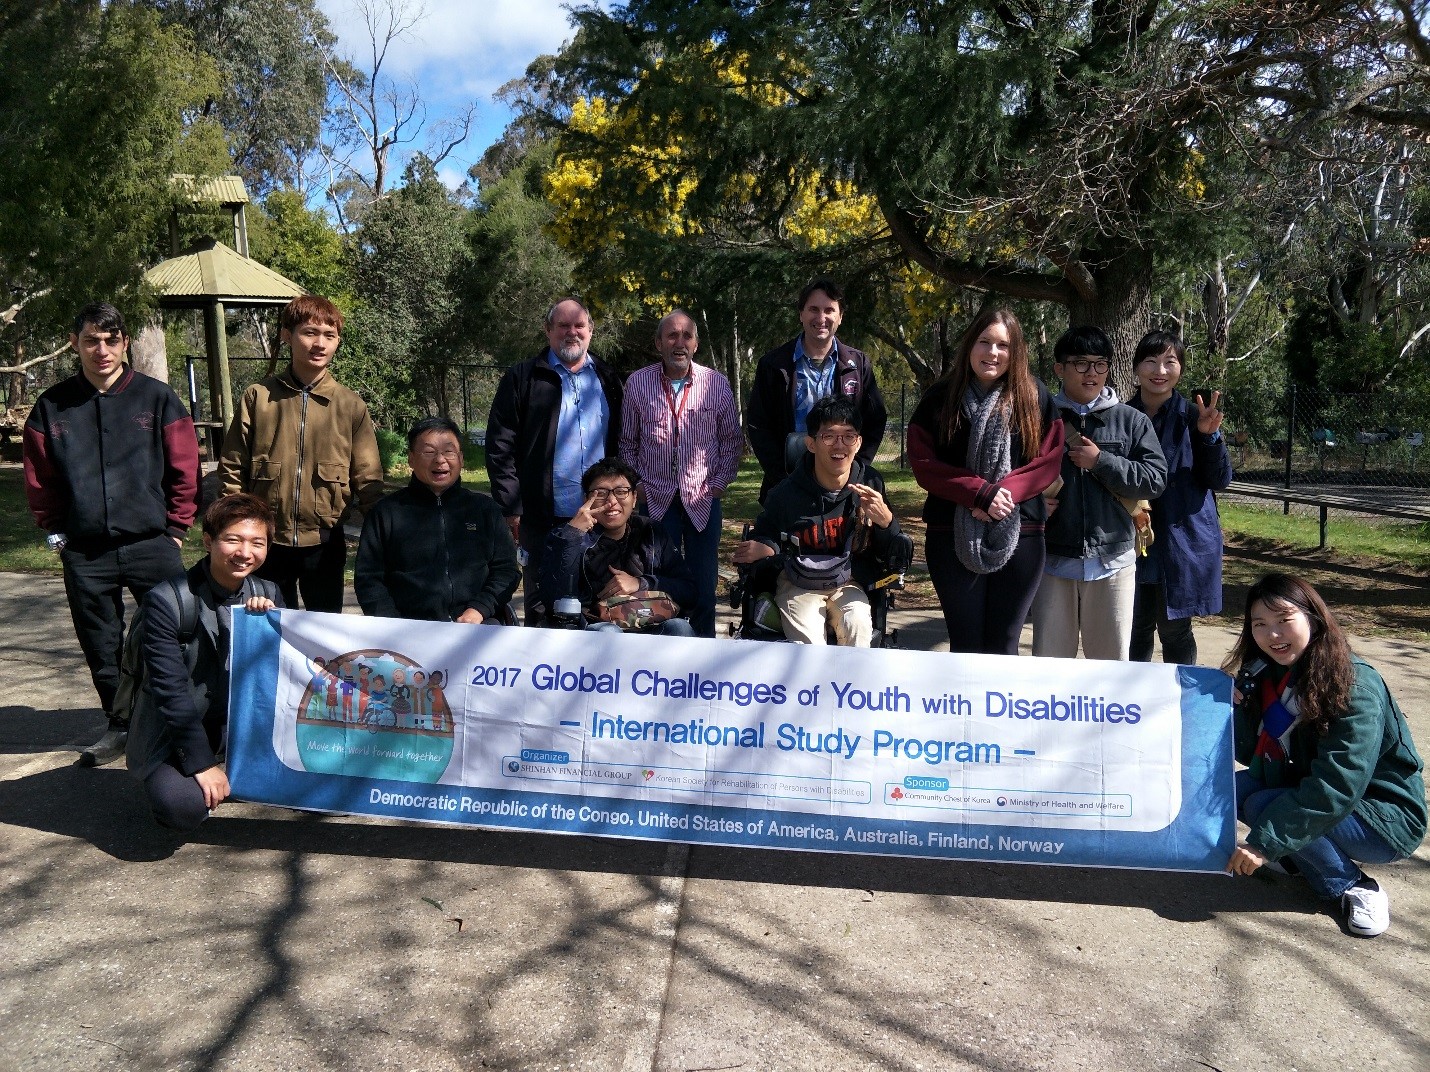 A group students and teachers standing outside under trees with a banner in front saying global challenges of youth with disabilities